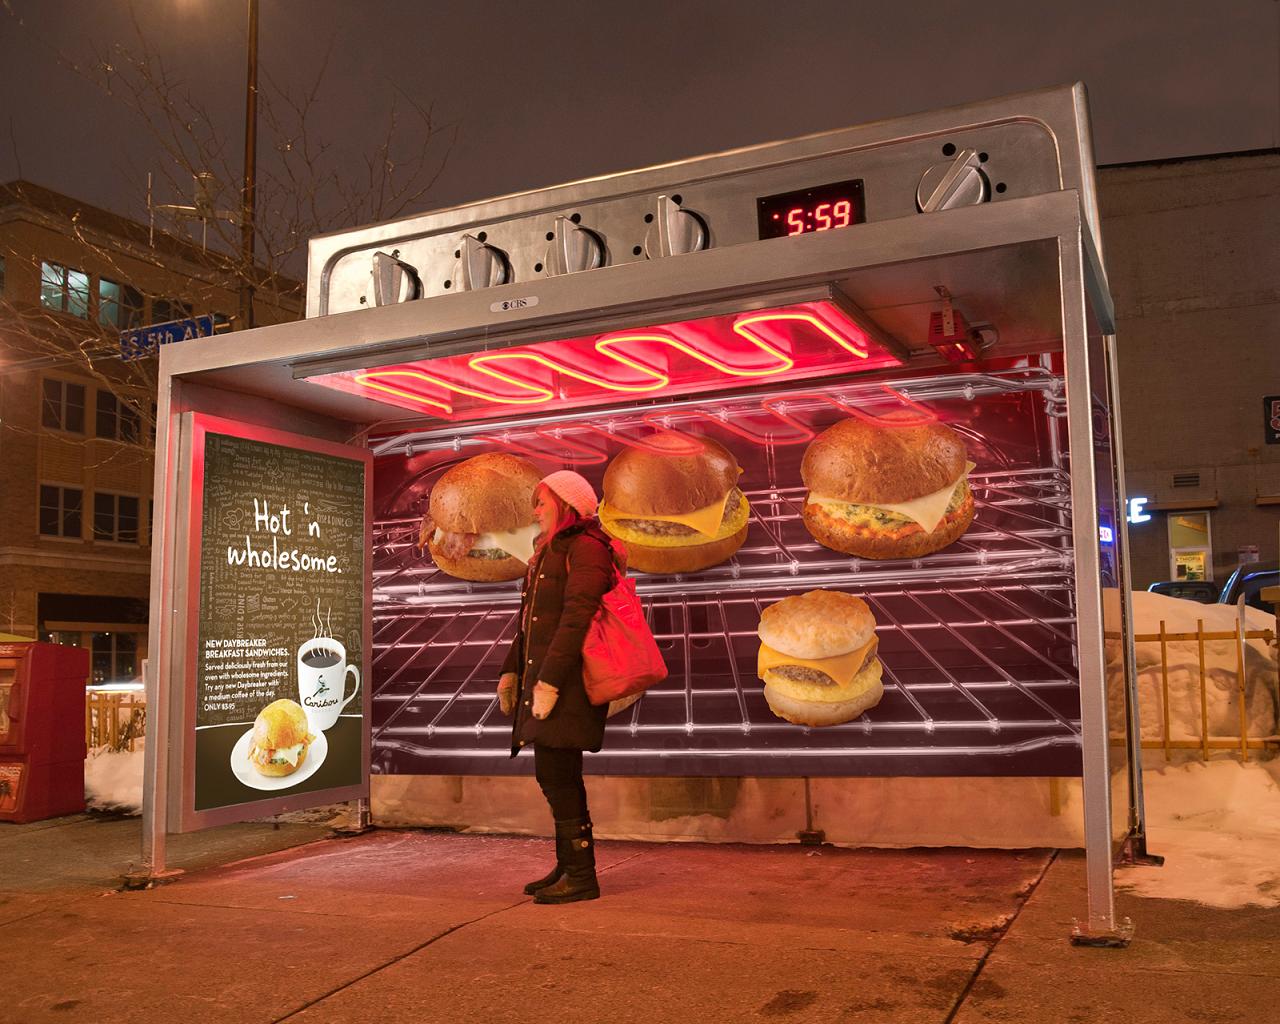 25 Clever and Unusual Bus Stop Advertisements – Part 2.